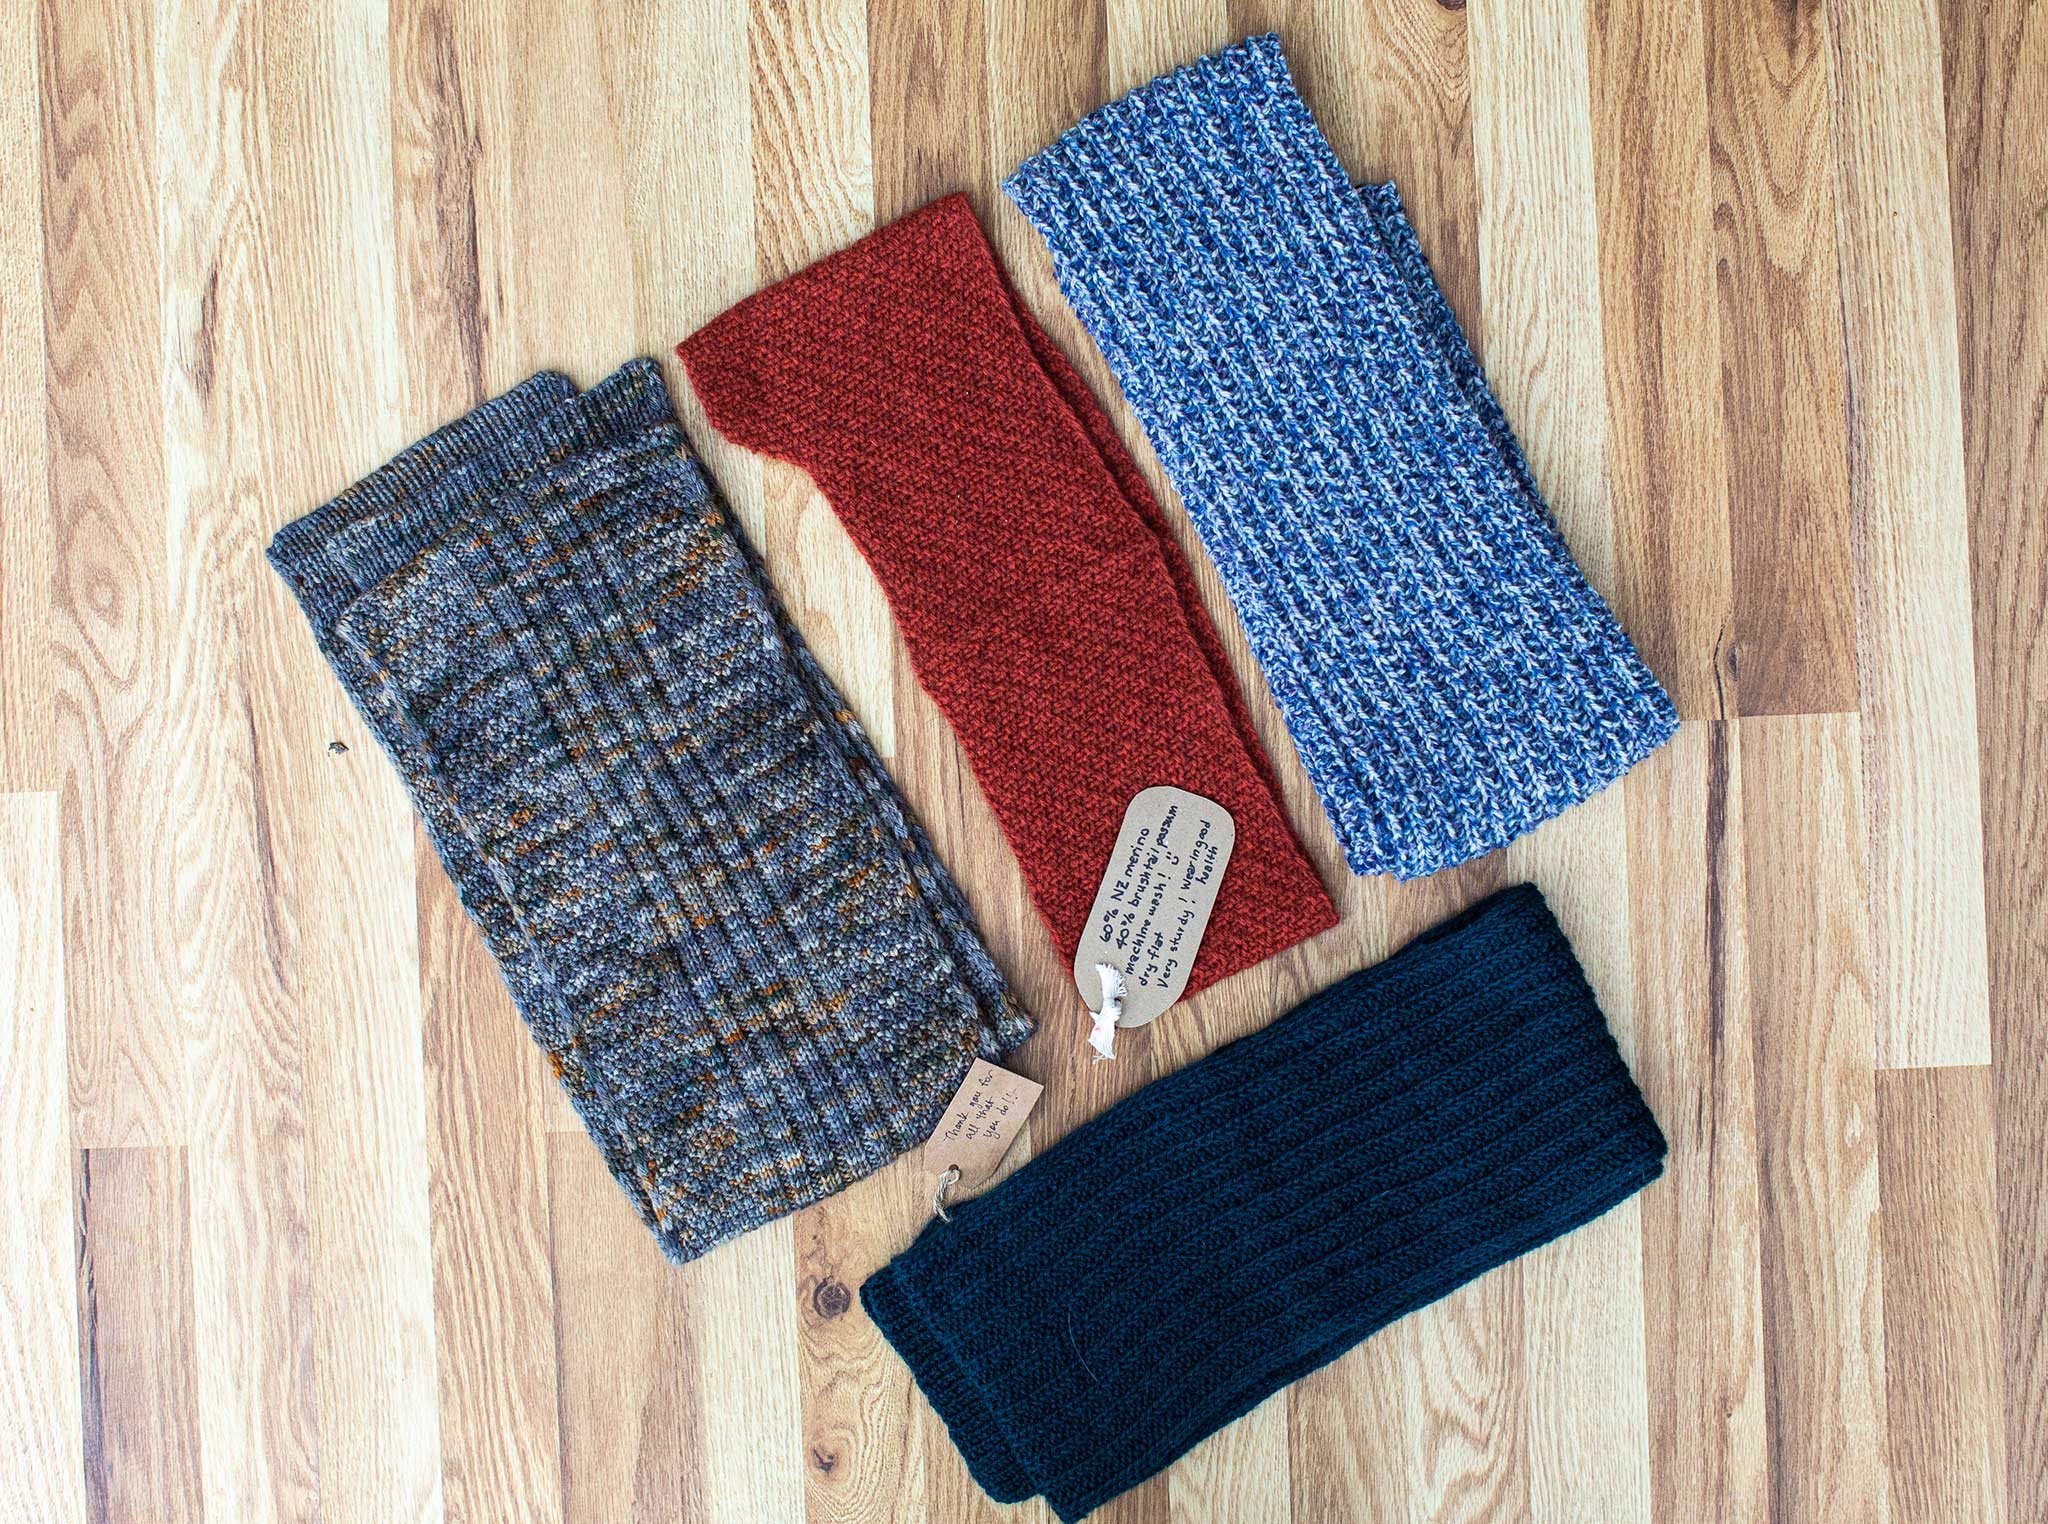 Four beautiful crafted items in blue, dark green, shades of grey and rust red.